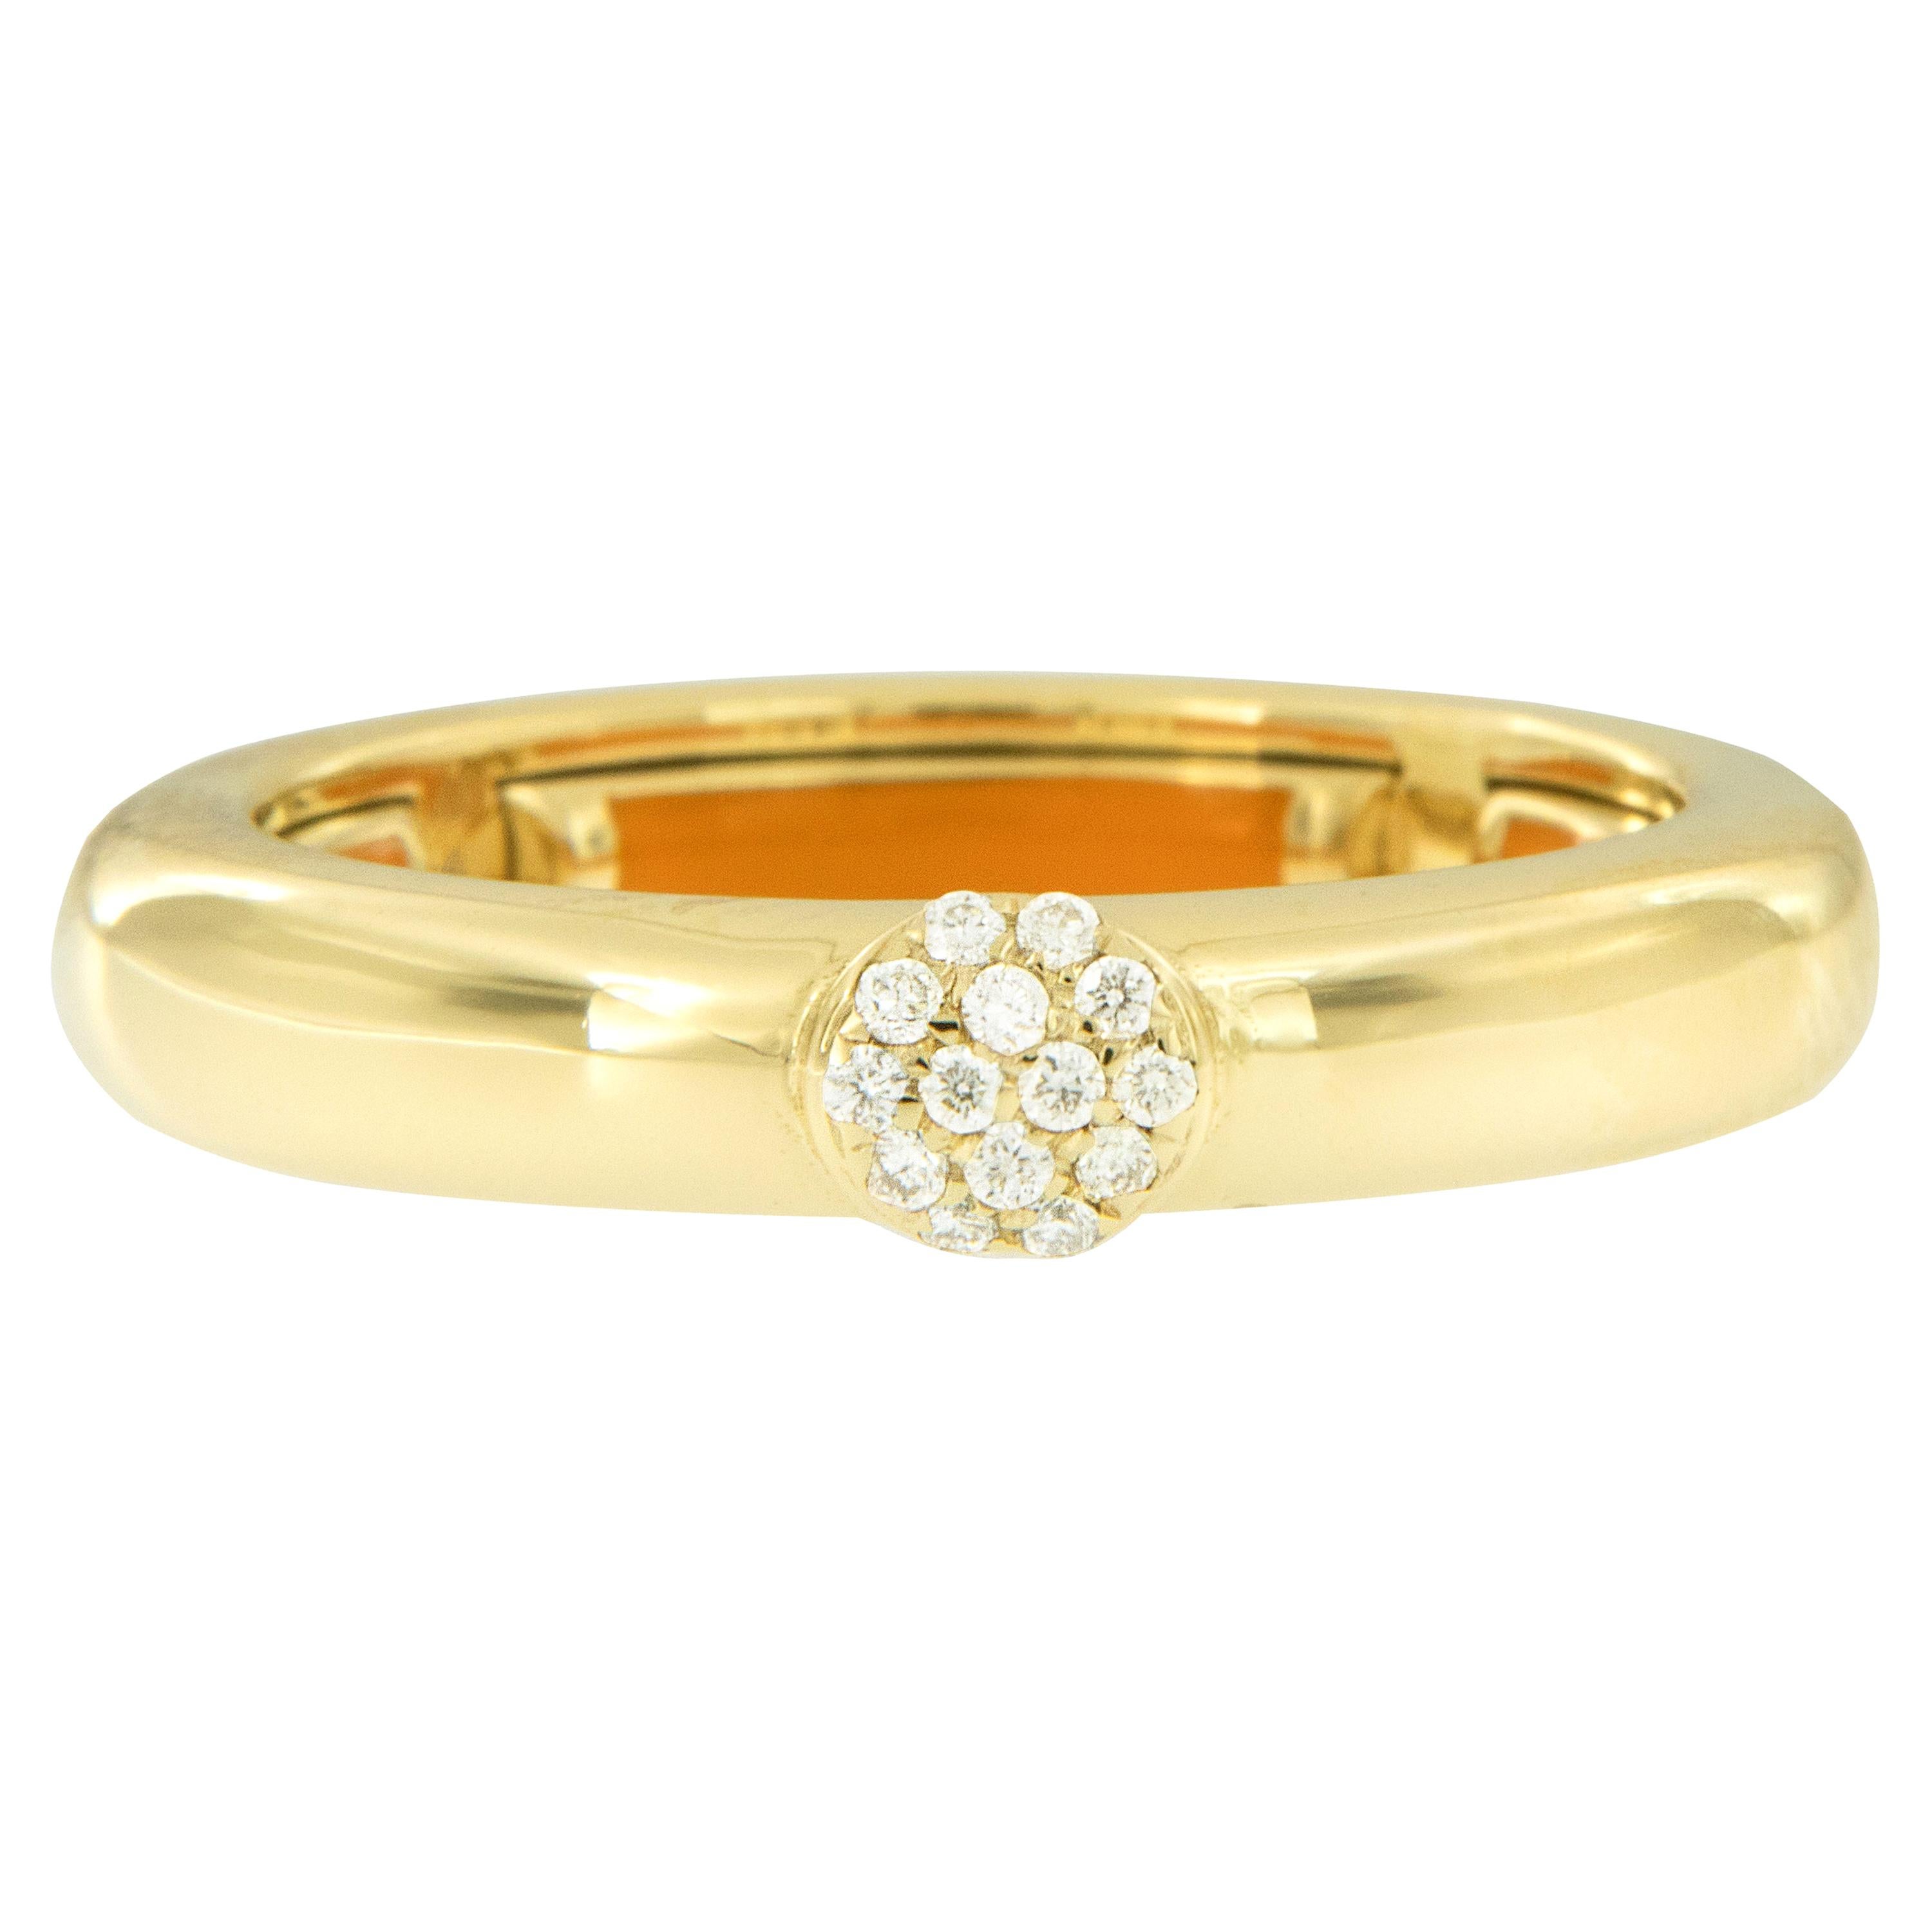 18 Karat Yellow Gold and Diamond Adjustable Ring Made in Italy